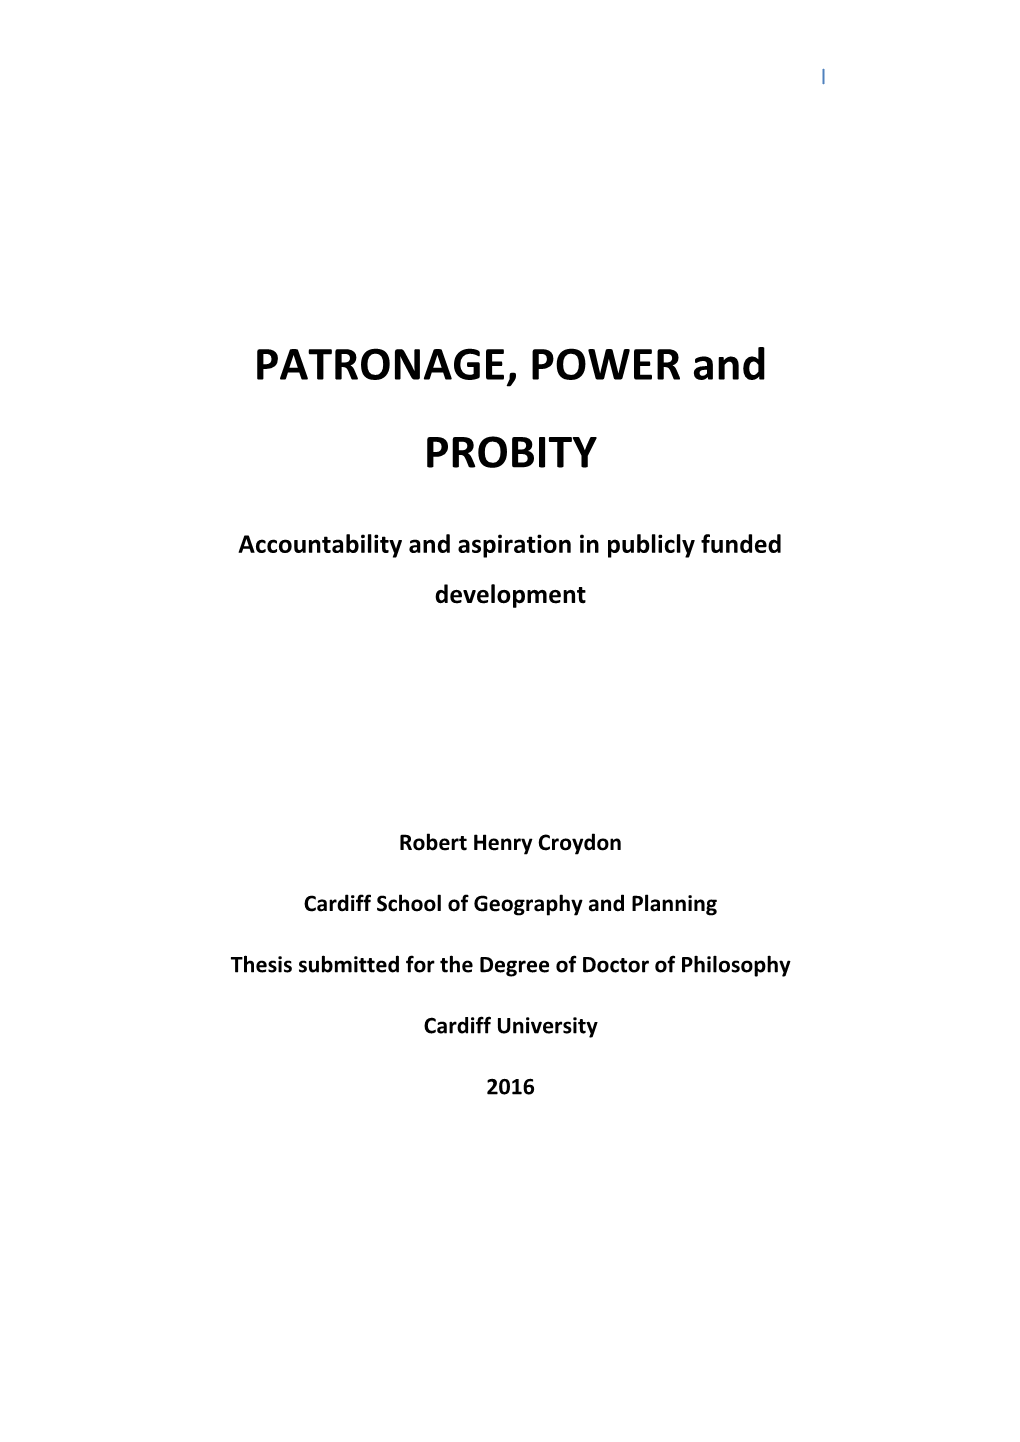 PATRONAGE, POWER and PROBITY